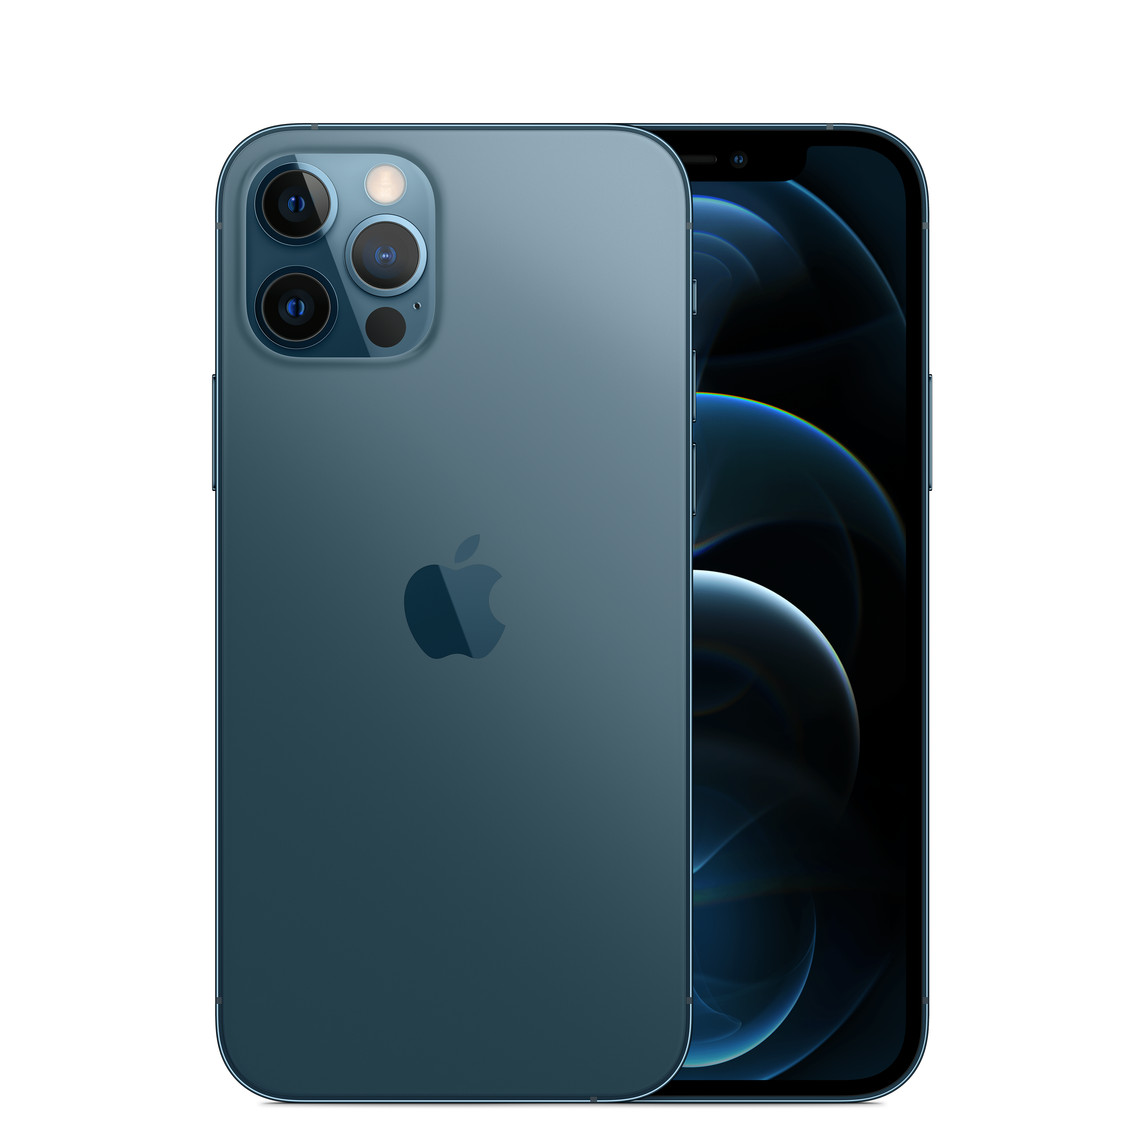 Blue iPhone 12 Pro, Pro camera system with True Tone flash, lidar, microphone, centered Apple logo, front, all-screen display